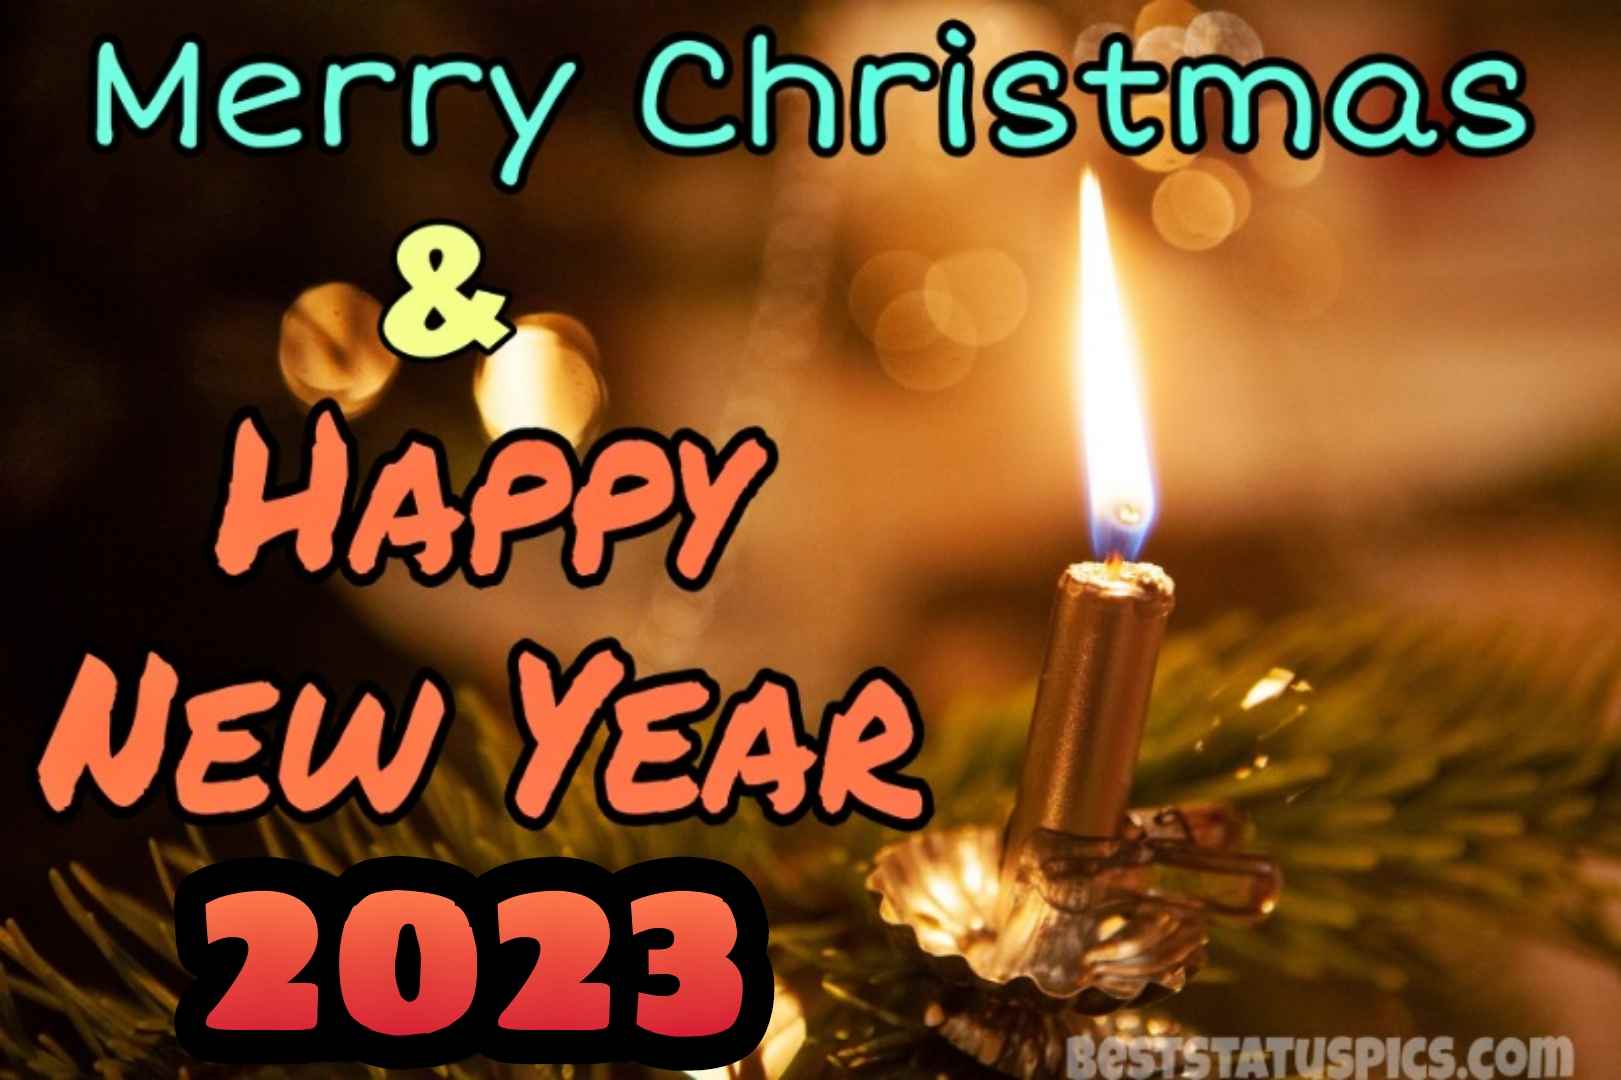 Merry Christmas and Happy New Year 2023 wishes images HD with candle for love and friend